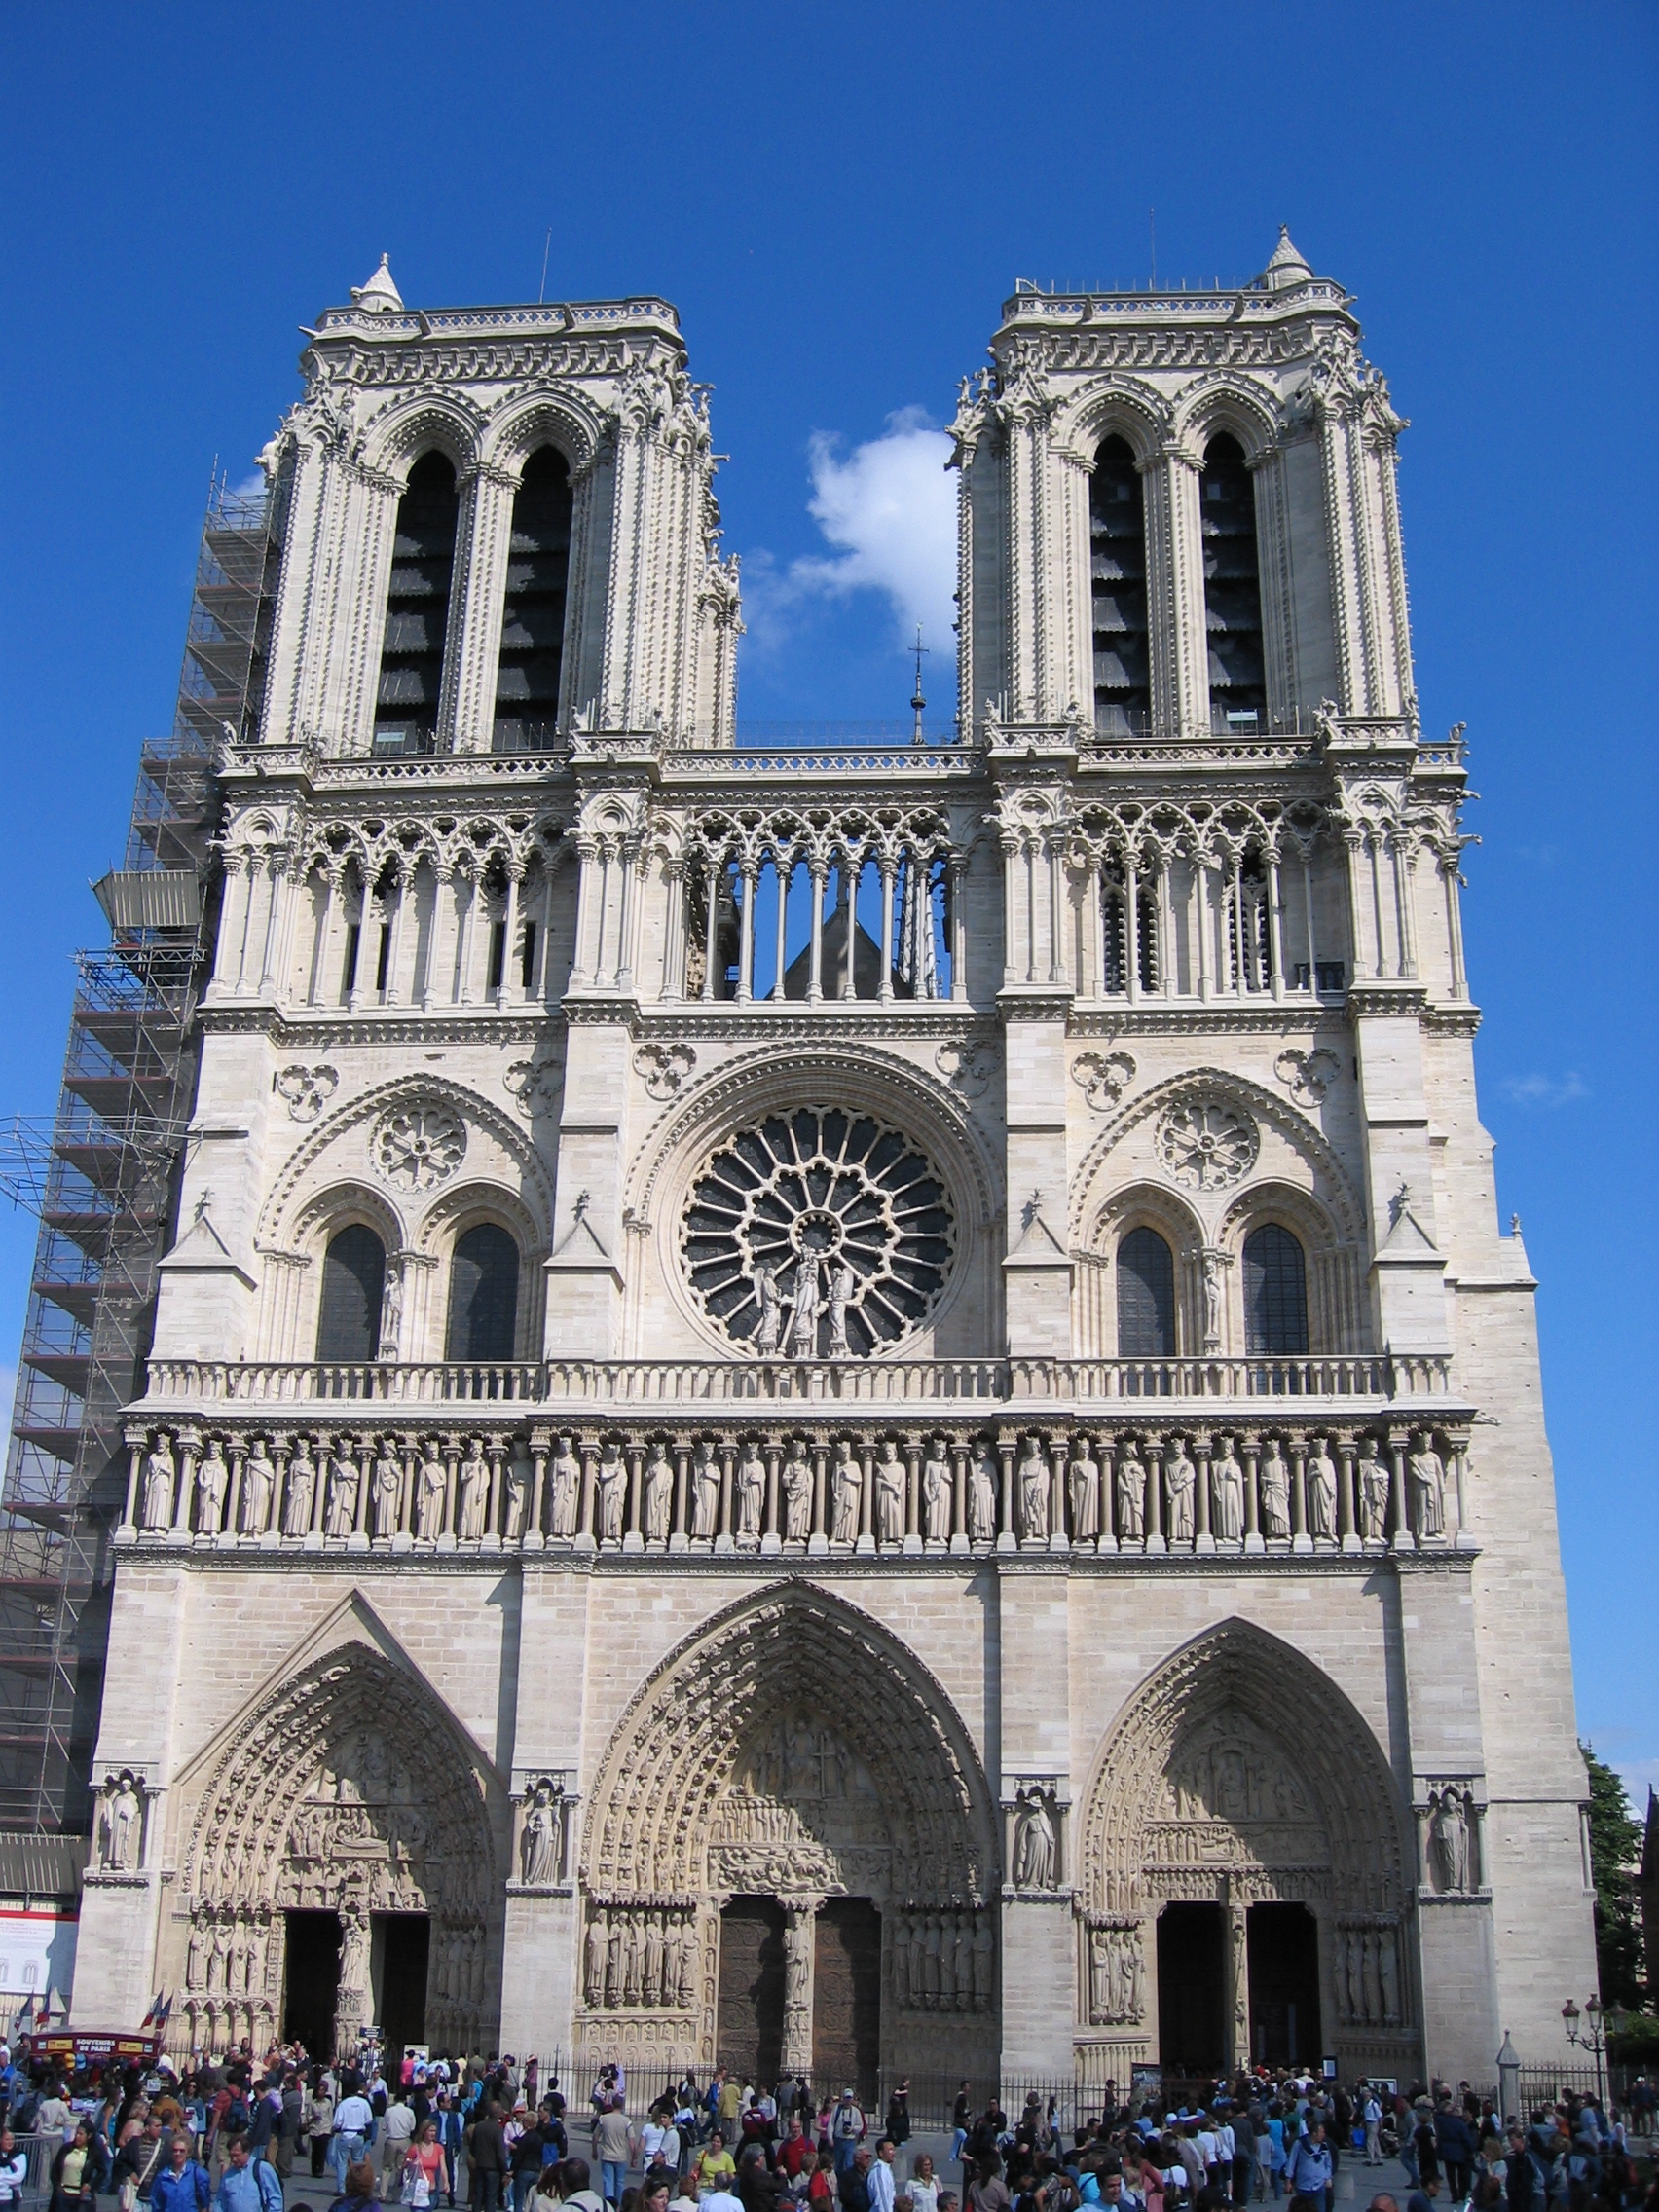 Architecture of cathedrals and great churches